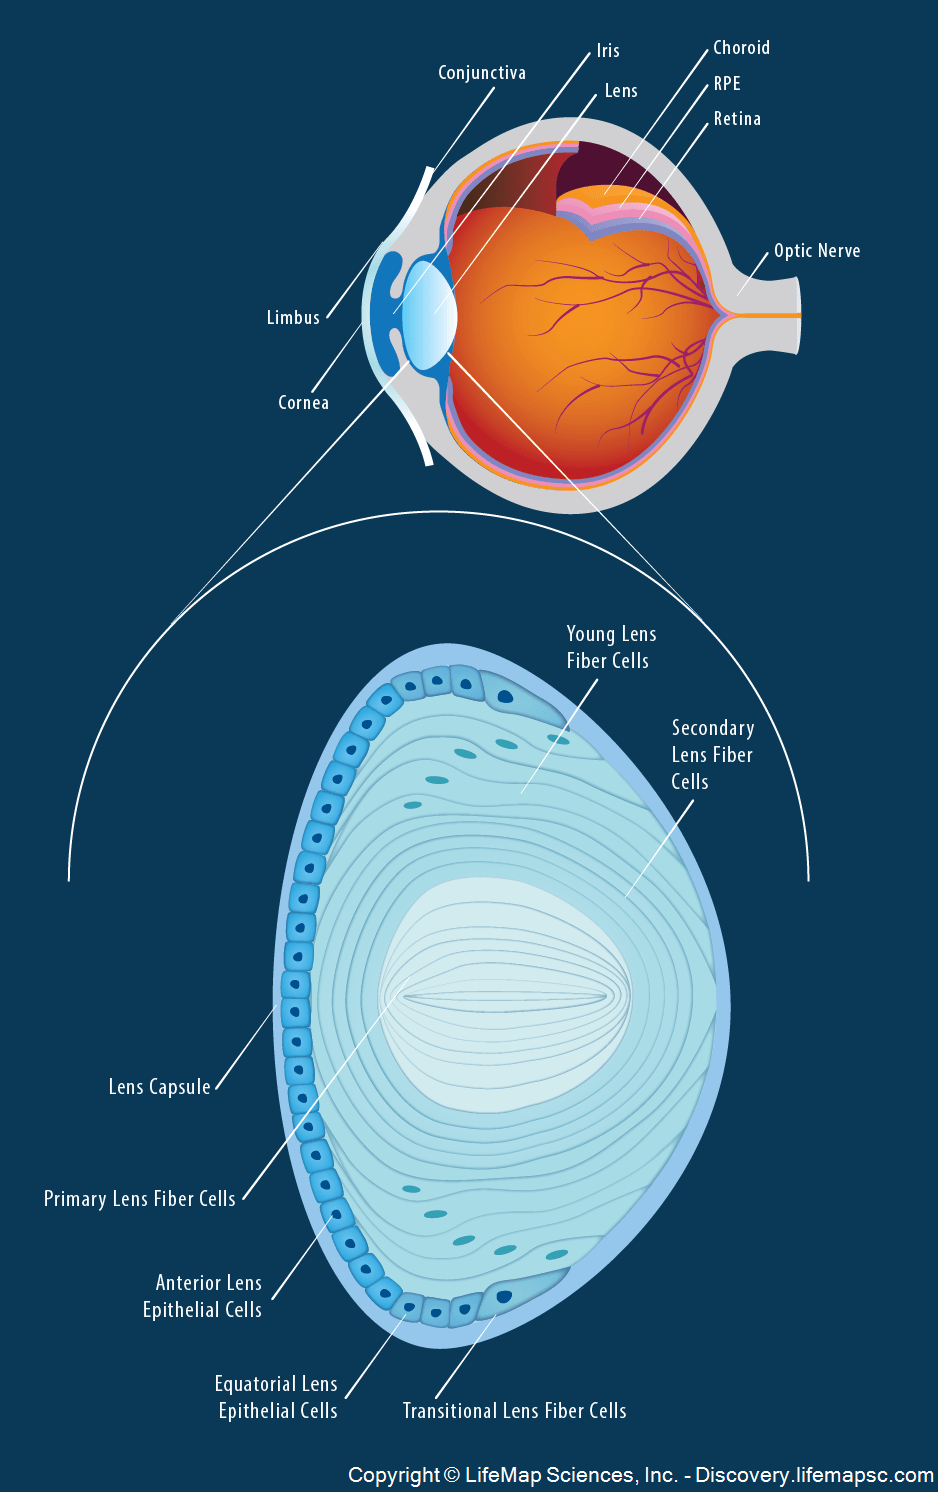 The Anatomy and Structure of the Adult Human Lens